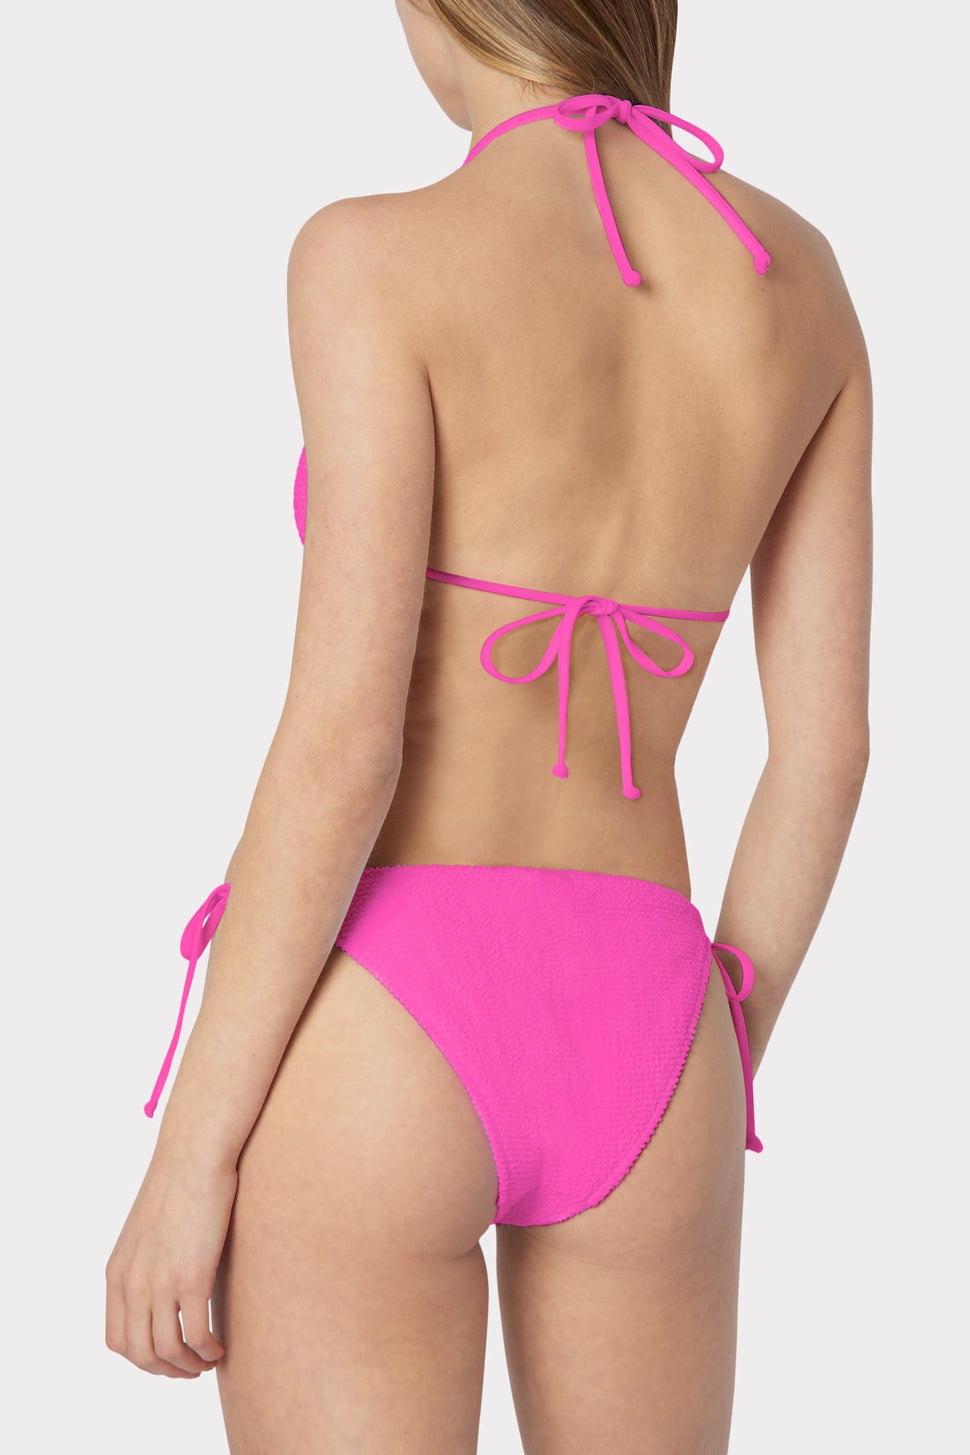 The Truth about Triangl Swim Suits – It's Not Hou It's Me